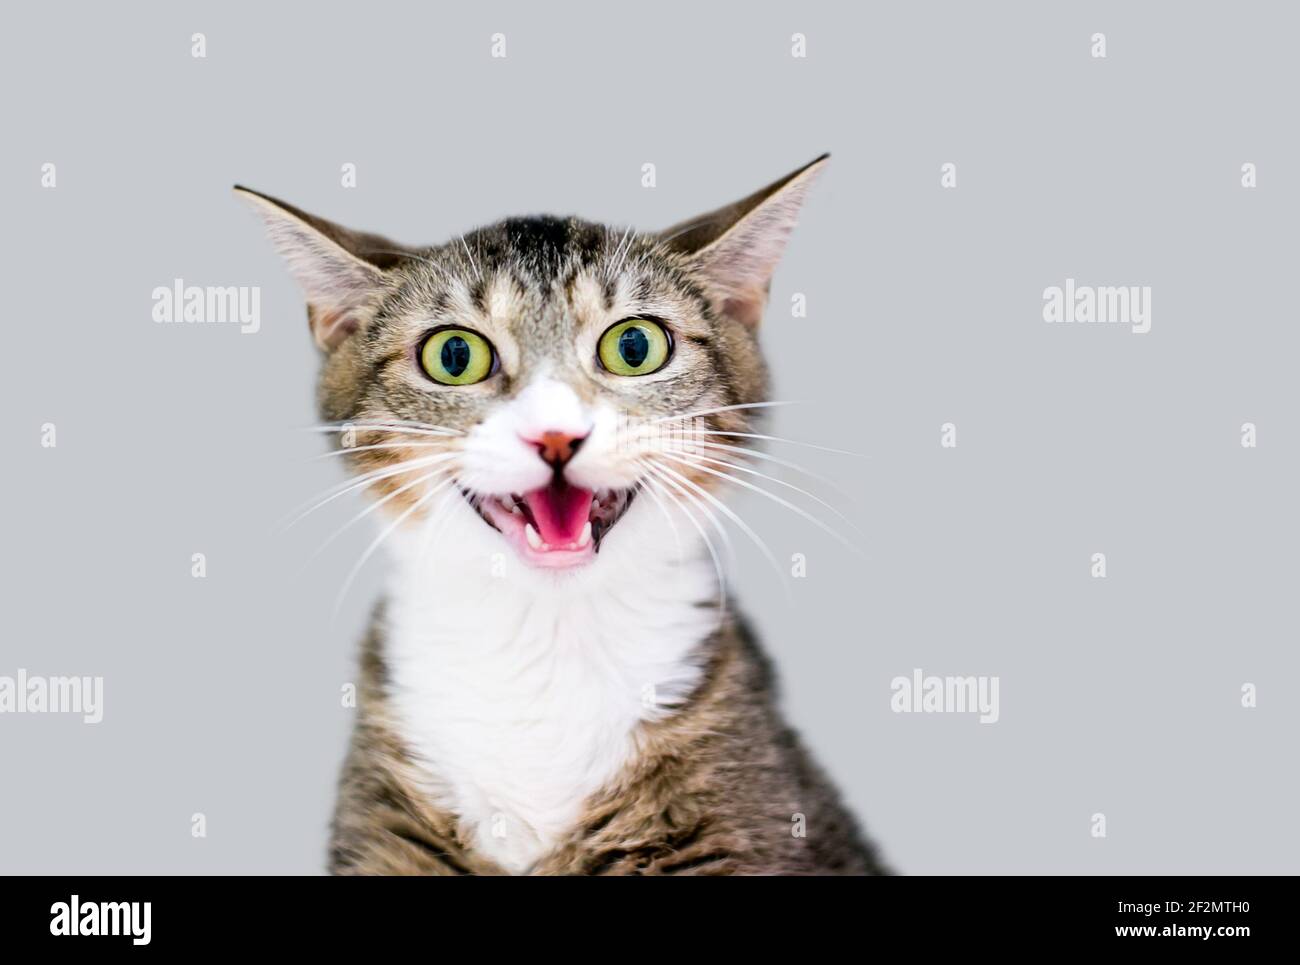 A shorthair kitten with dilated pupils meowing Stock Photo